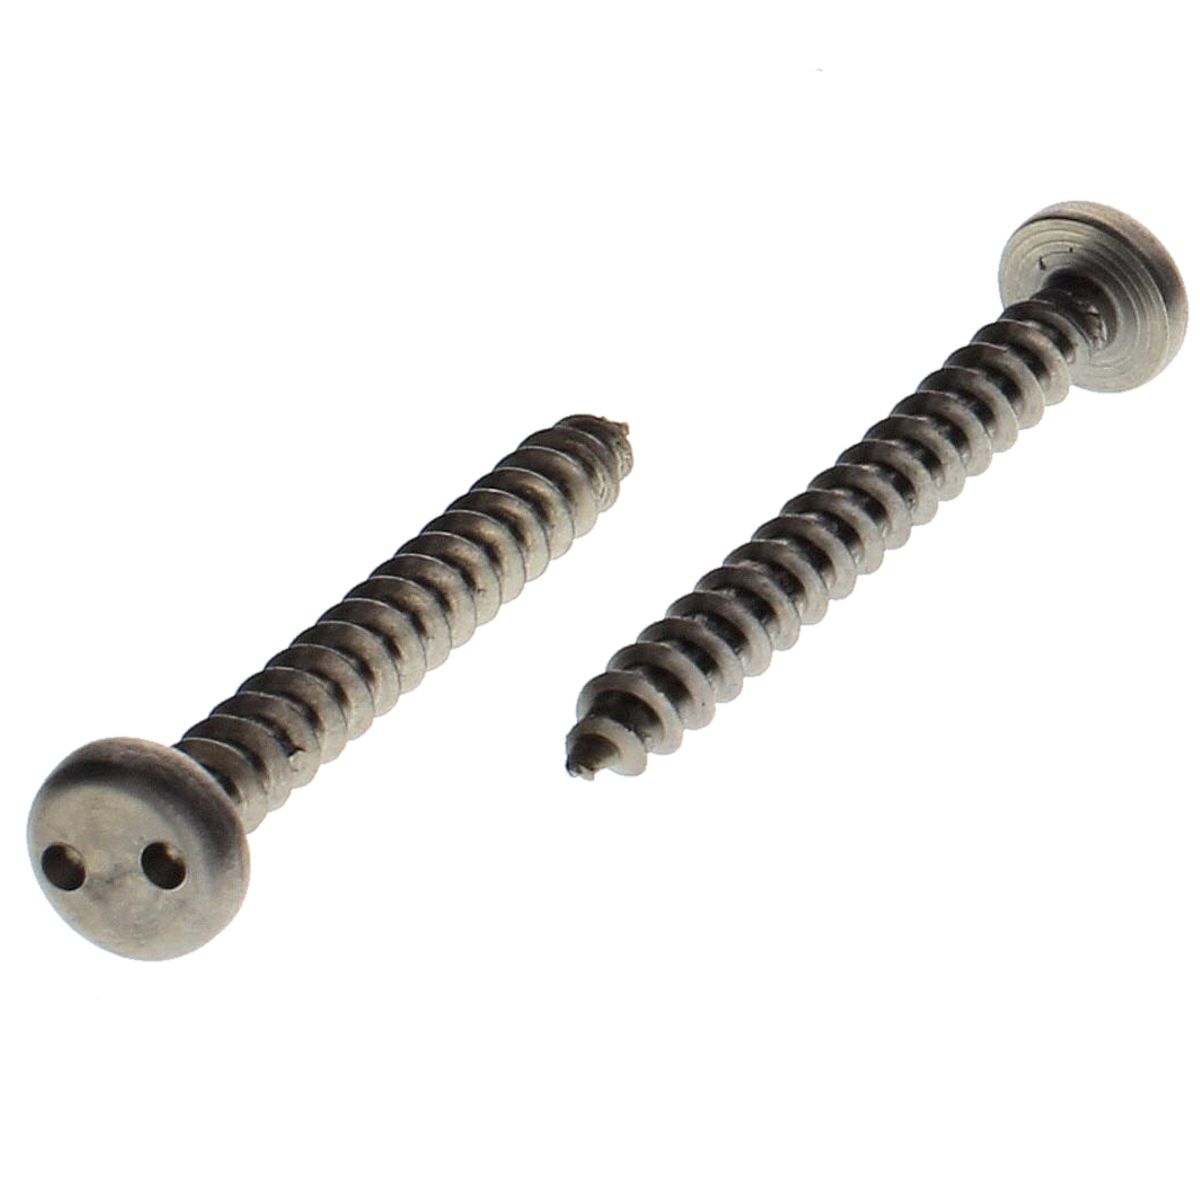 #6 x 1-1/2" Pan Head Spanner Security Tapping Screws — 18-8 Stainless Steel, 100/PKG